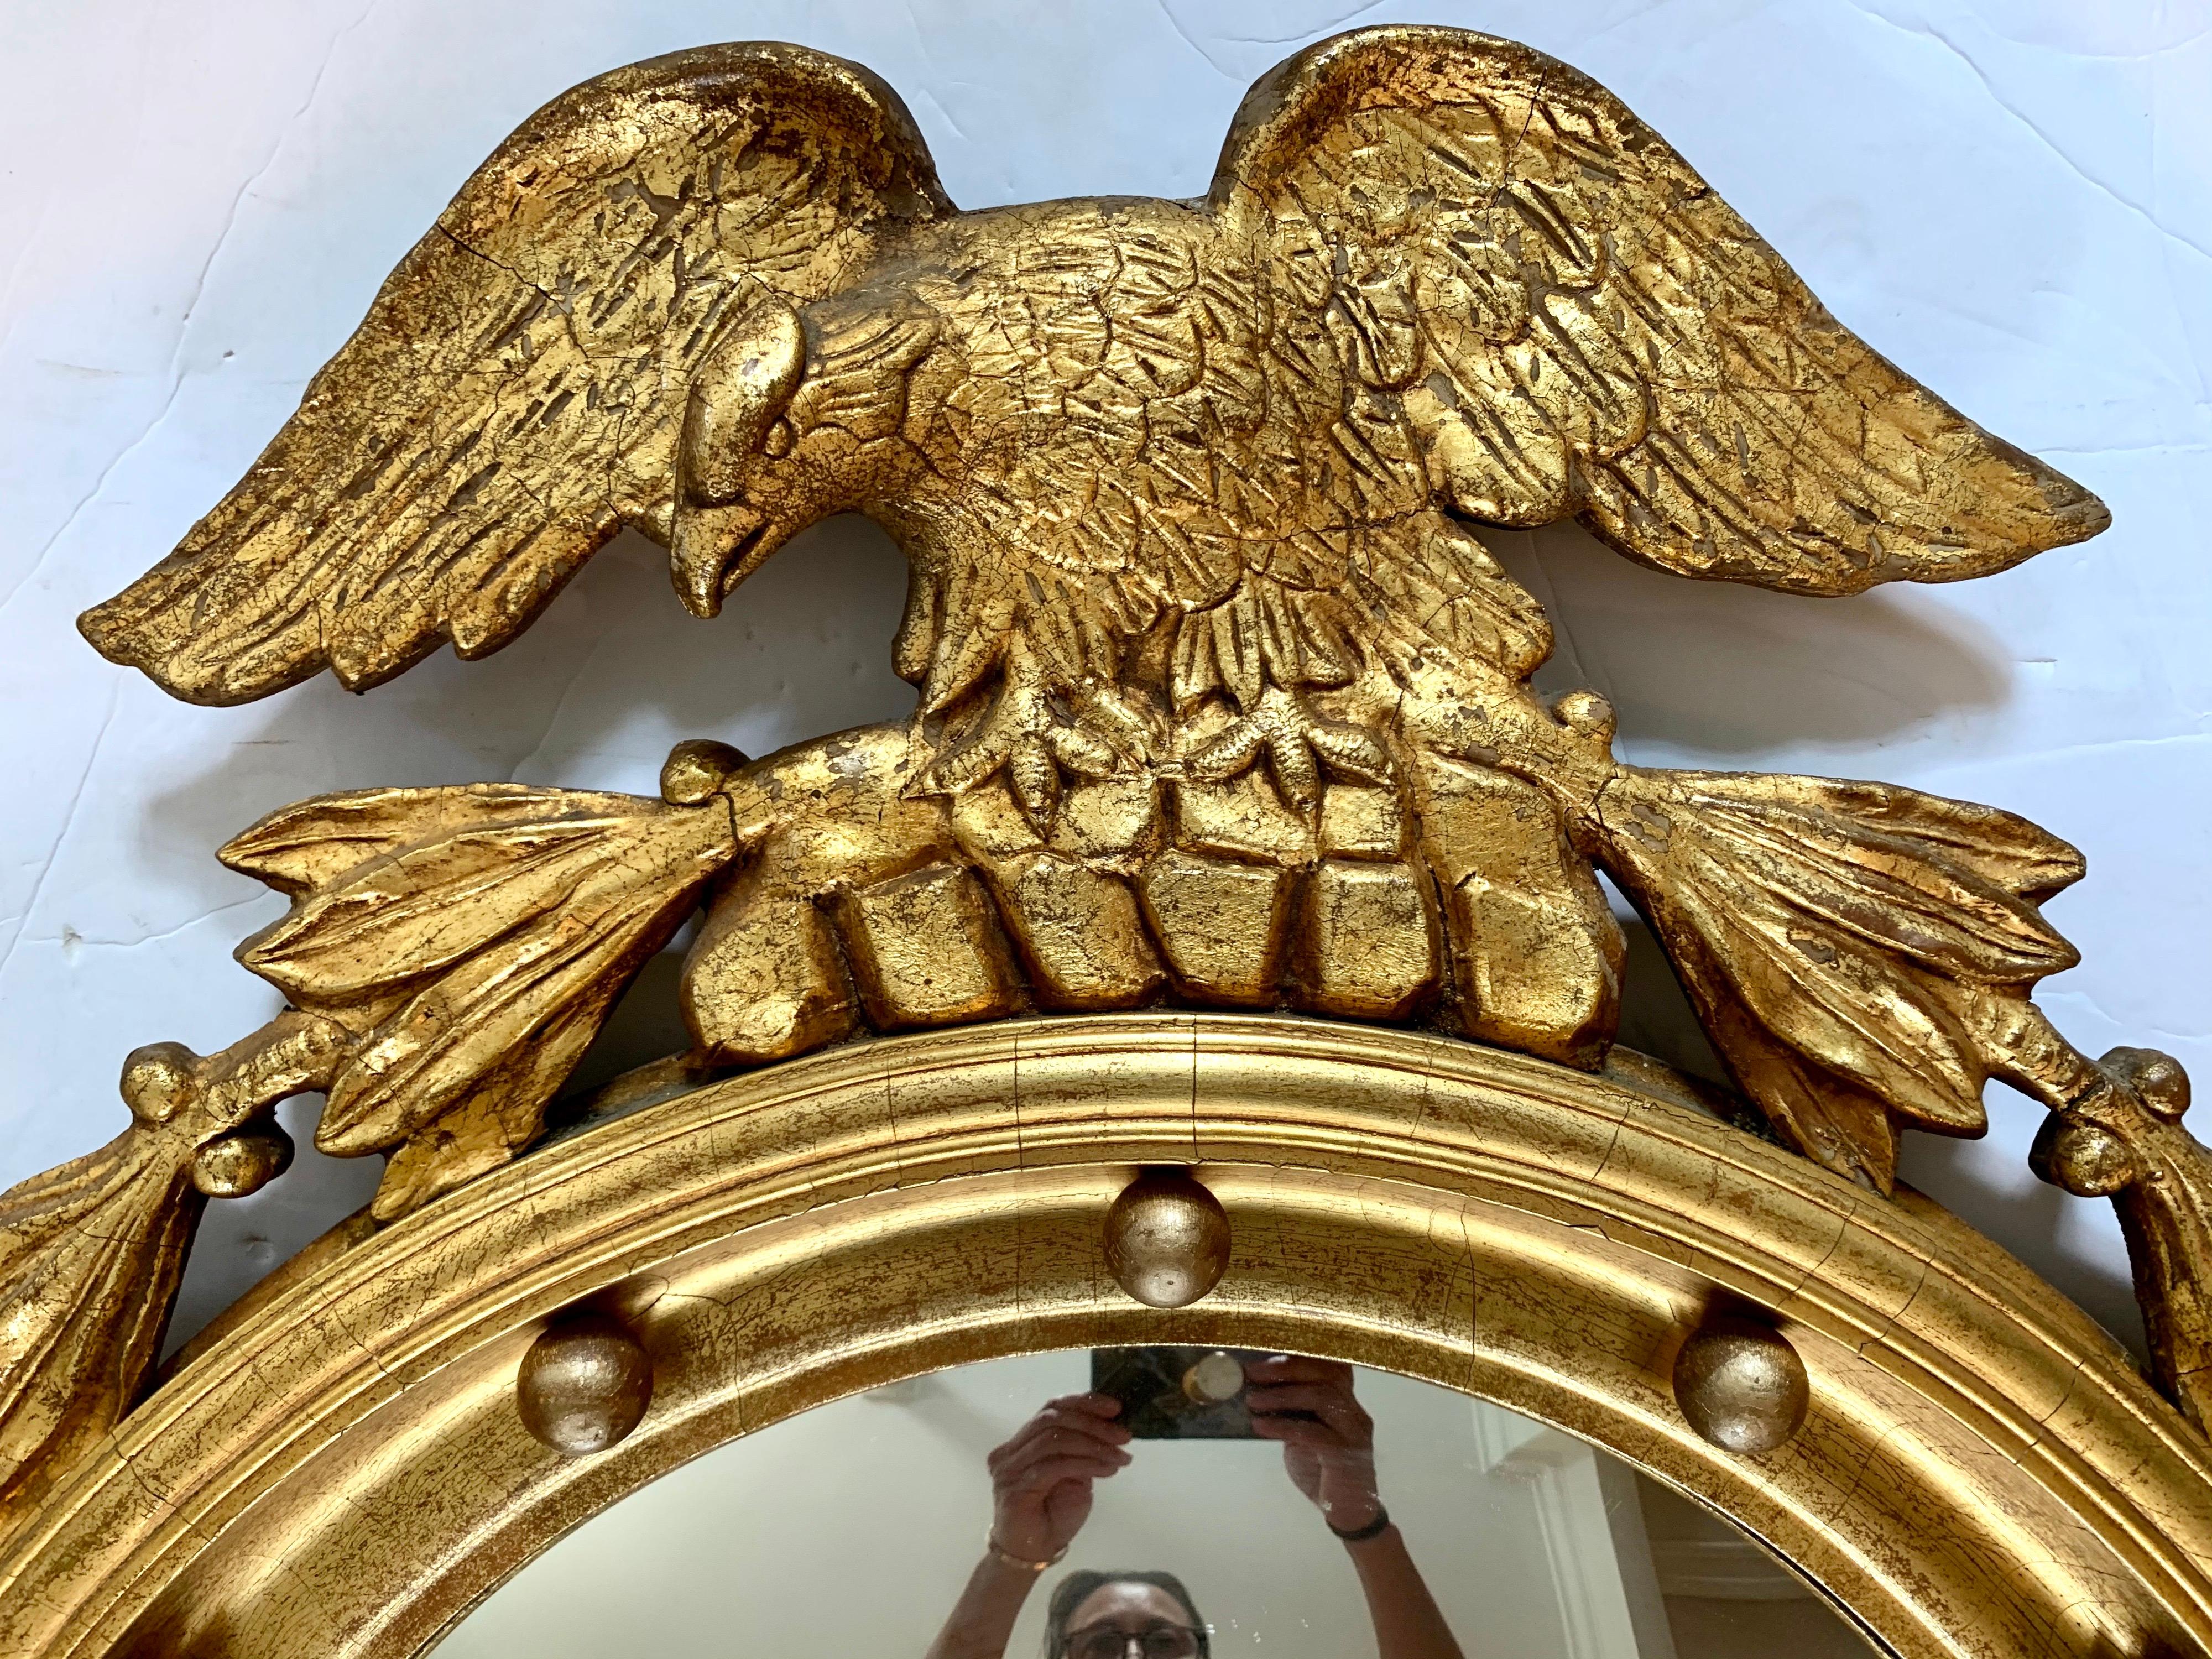 American Federal gilt convex wall mirror with ball design, fluted border, and eagle top, circa late 19th century, USA. Real giltwood, not resin.